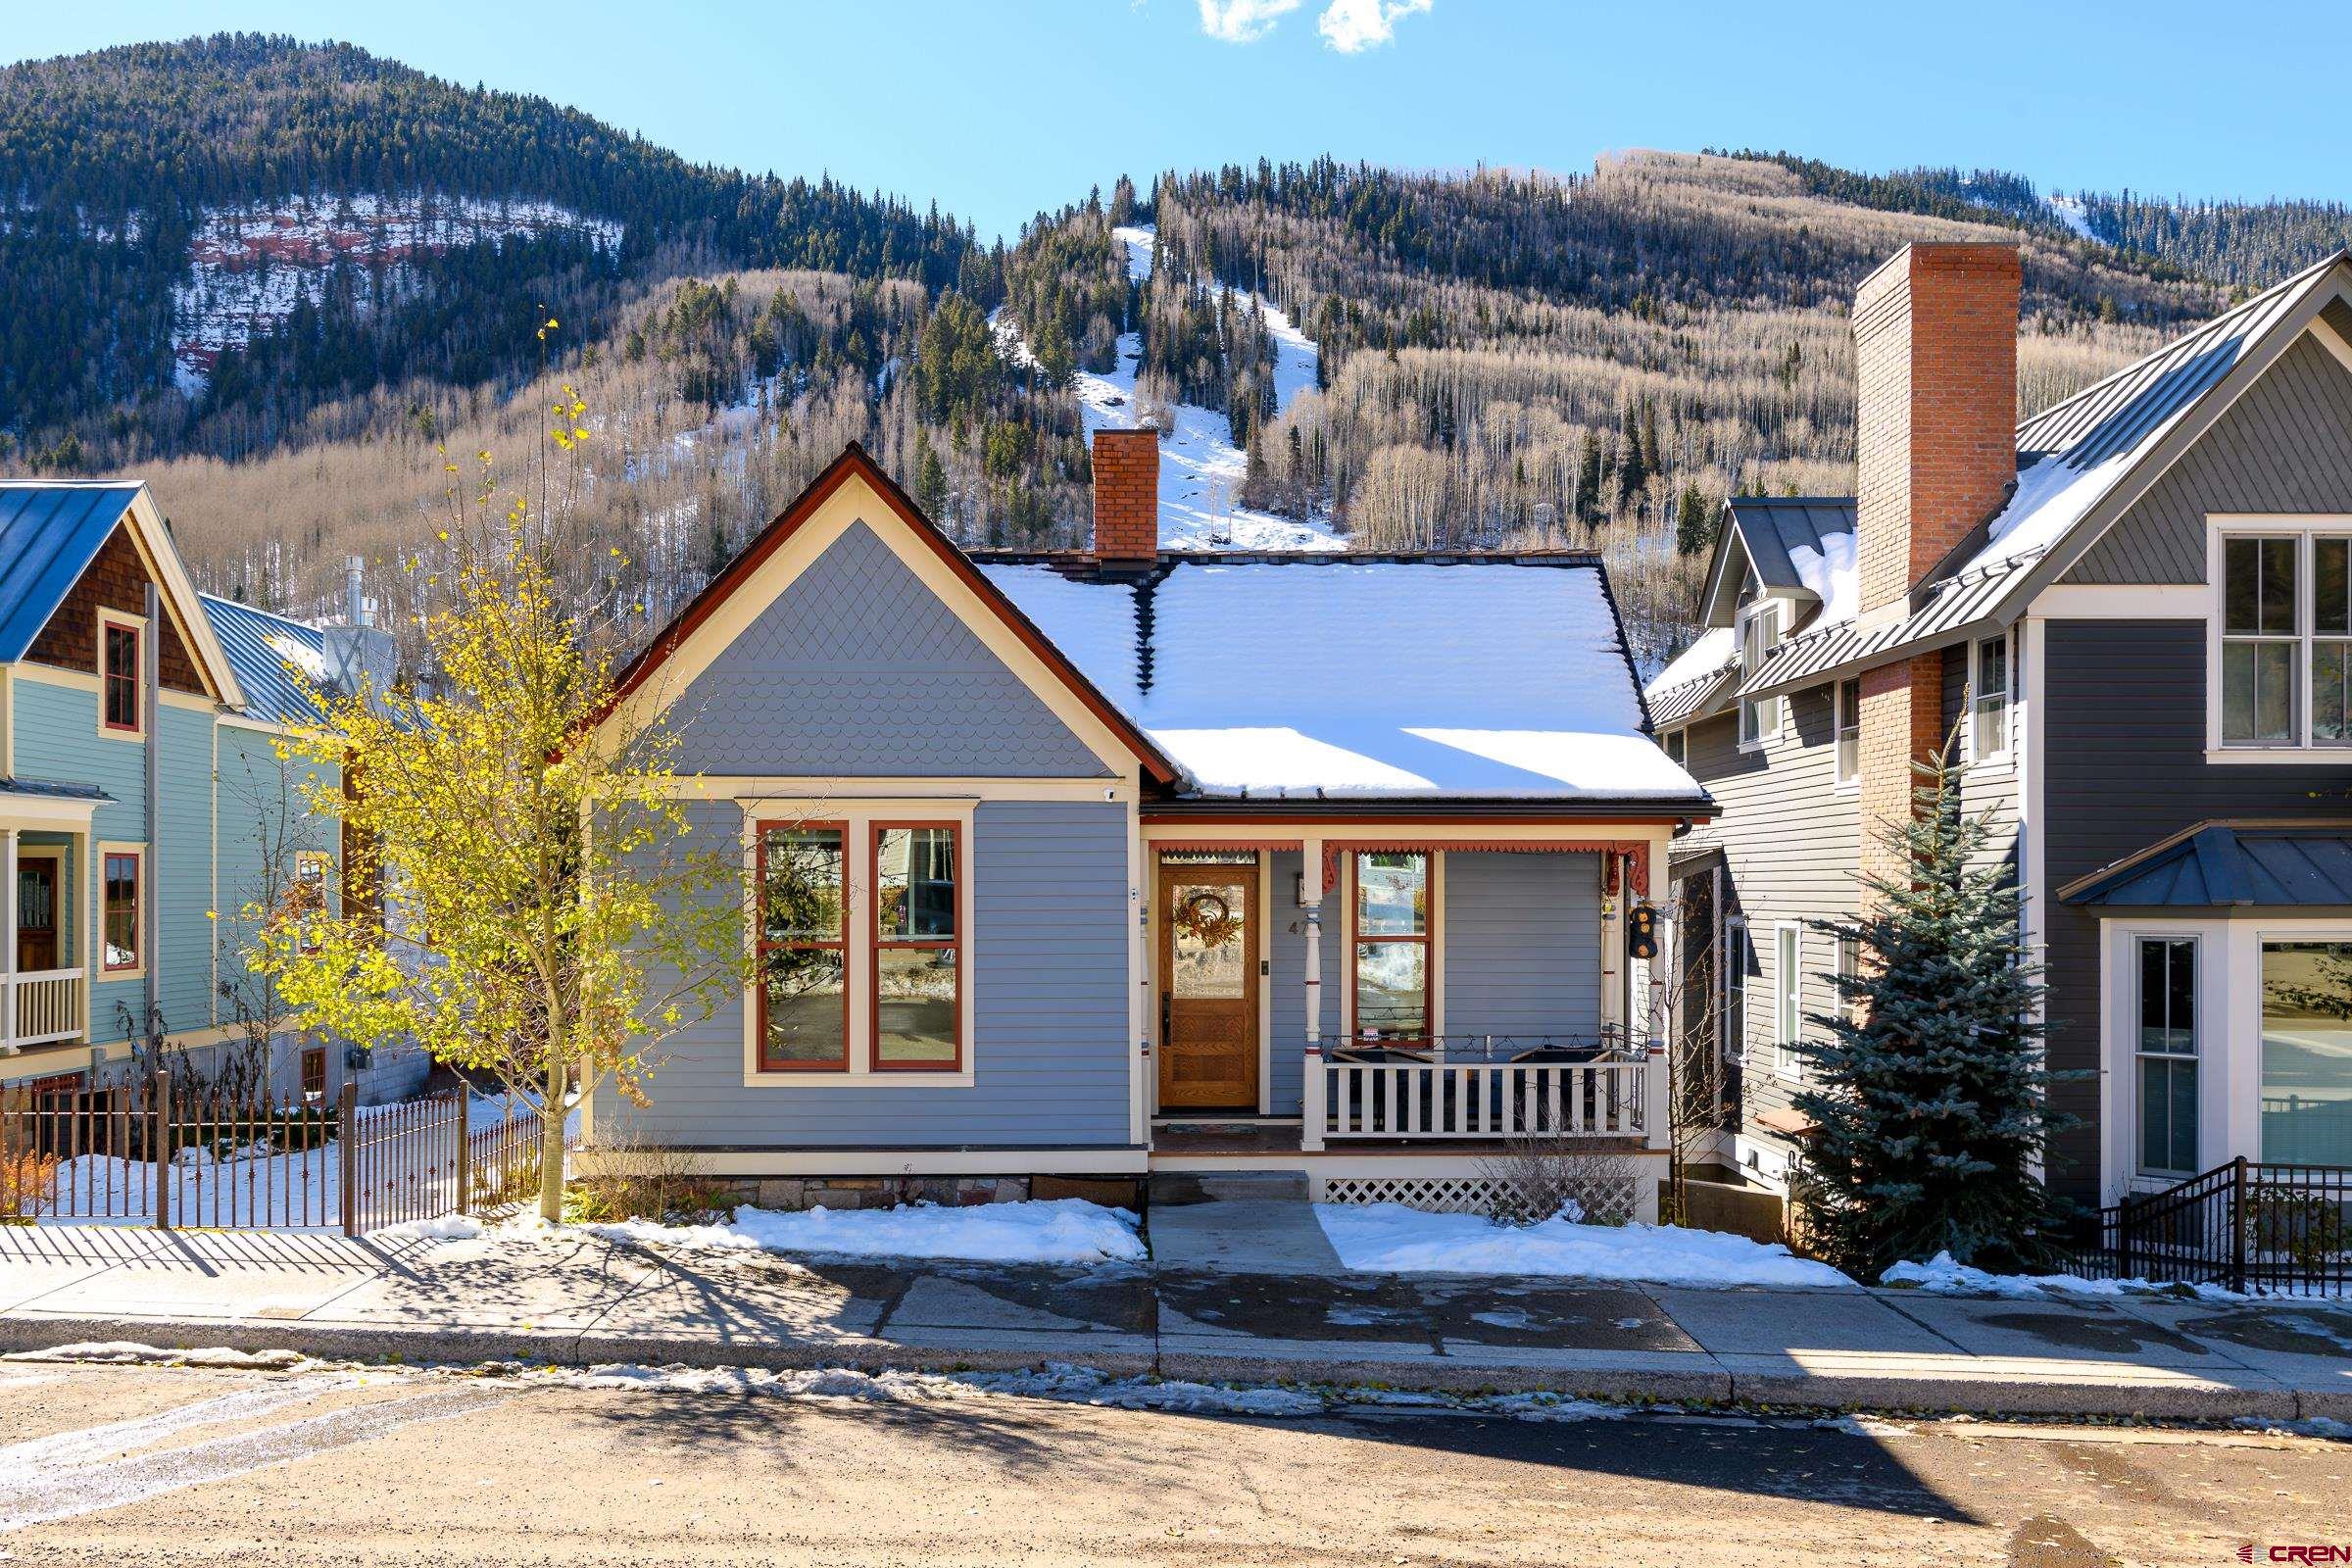 Nestled in the majestic San Juan Mountains, this fully refurbished and expanded 1892 Historic home offers stunning 360 views. The Main Street porch, a favorite spot for homeowners for 131 years, provides front row seats to enjoy the Magic of Telluride. Some things never grow old! Remodeled in 2018 by 'Jack Wesson, LuxWest Interiors, and Finbro Construction', the home features a spacious open living, dining, and kitchen area, which opens-up entirely to a large sun-kissed BBQ deck and hot tub. The views of Aspen trees, mountains and ski runs are spectacular! This incredible home boasts five luxurious bedrooms, four exquisitely designed bathrooms, a movie/cocktail lounge with a wet bar, two laundry rooms, and a heated garage and driveway.  The air-conditioned top-floor suite offers magnificent views and a private balcony. The house is equipped with a fire sprinkler system, security system, Lifebreath ventilation system and so many more amazing details. Located within walking distance to Main Street shops, dining, skiing, hiking, the valley floor, Bear Creek, and the Gondola, this fully furnished retreat is a dream destination for those who seek a luxurious mountain lifestyle.